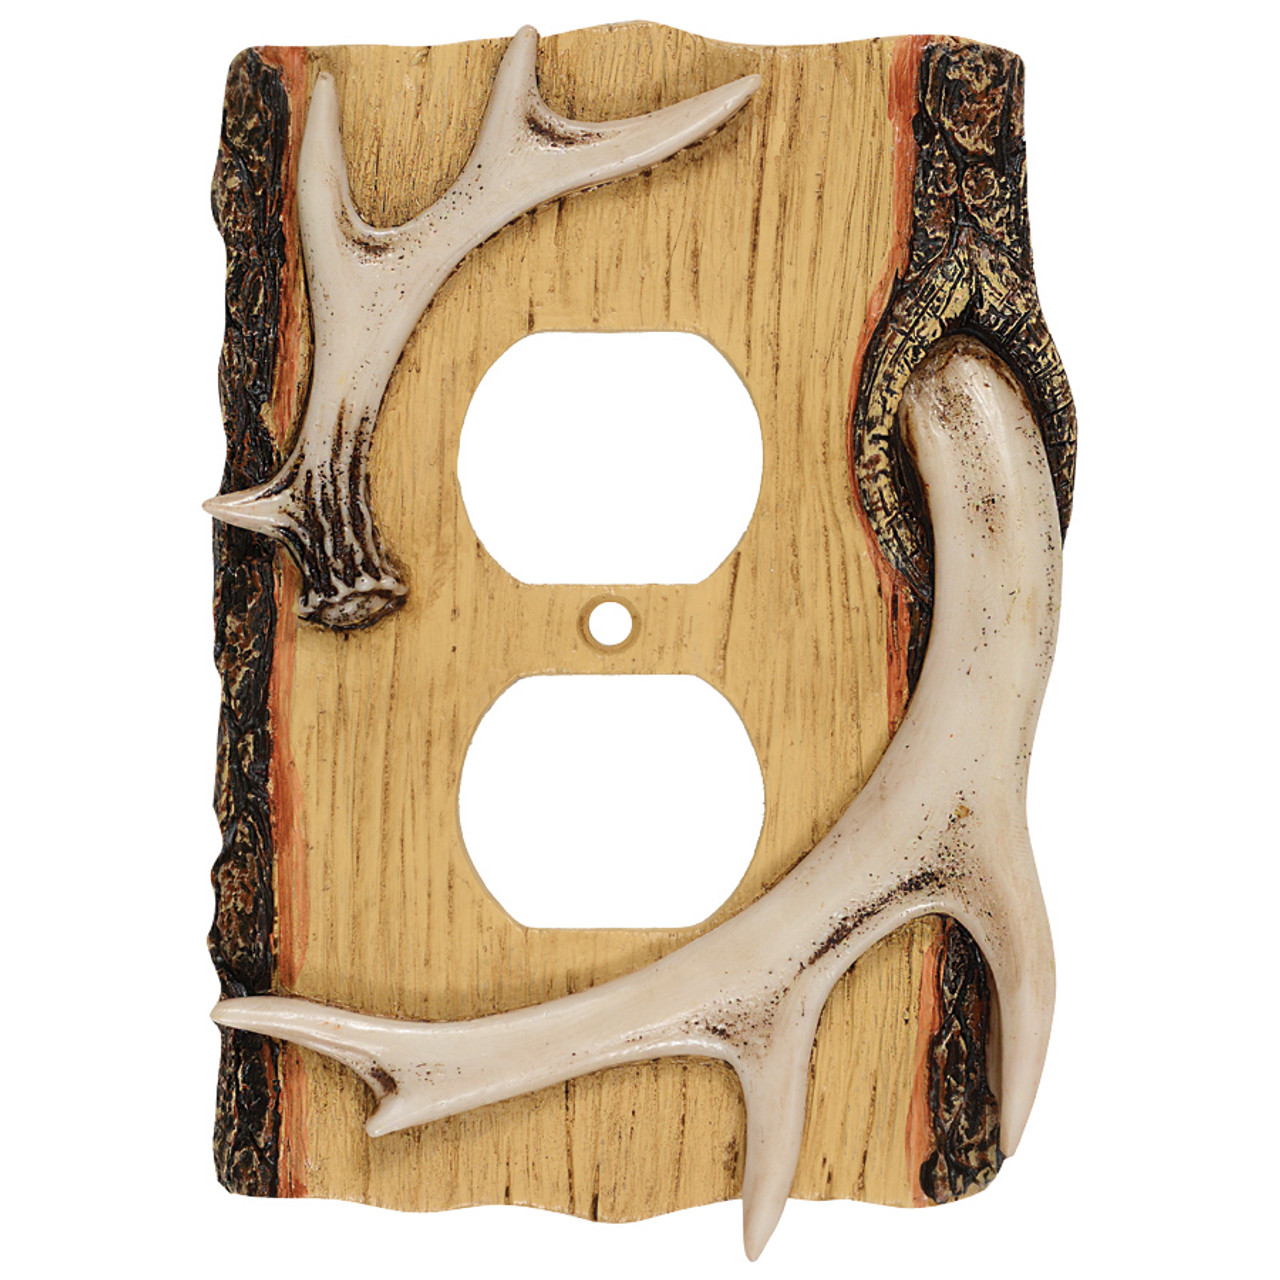 Antler Playing Card Box - 6W x 5D x 2H, Black Forest Decor